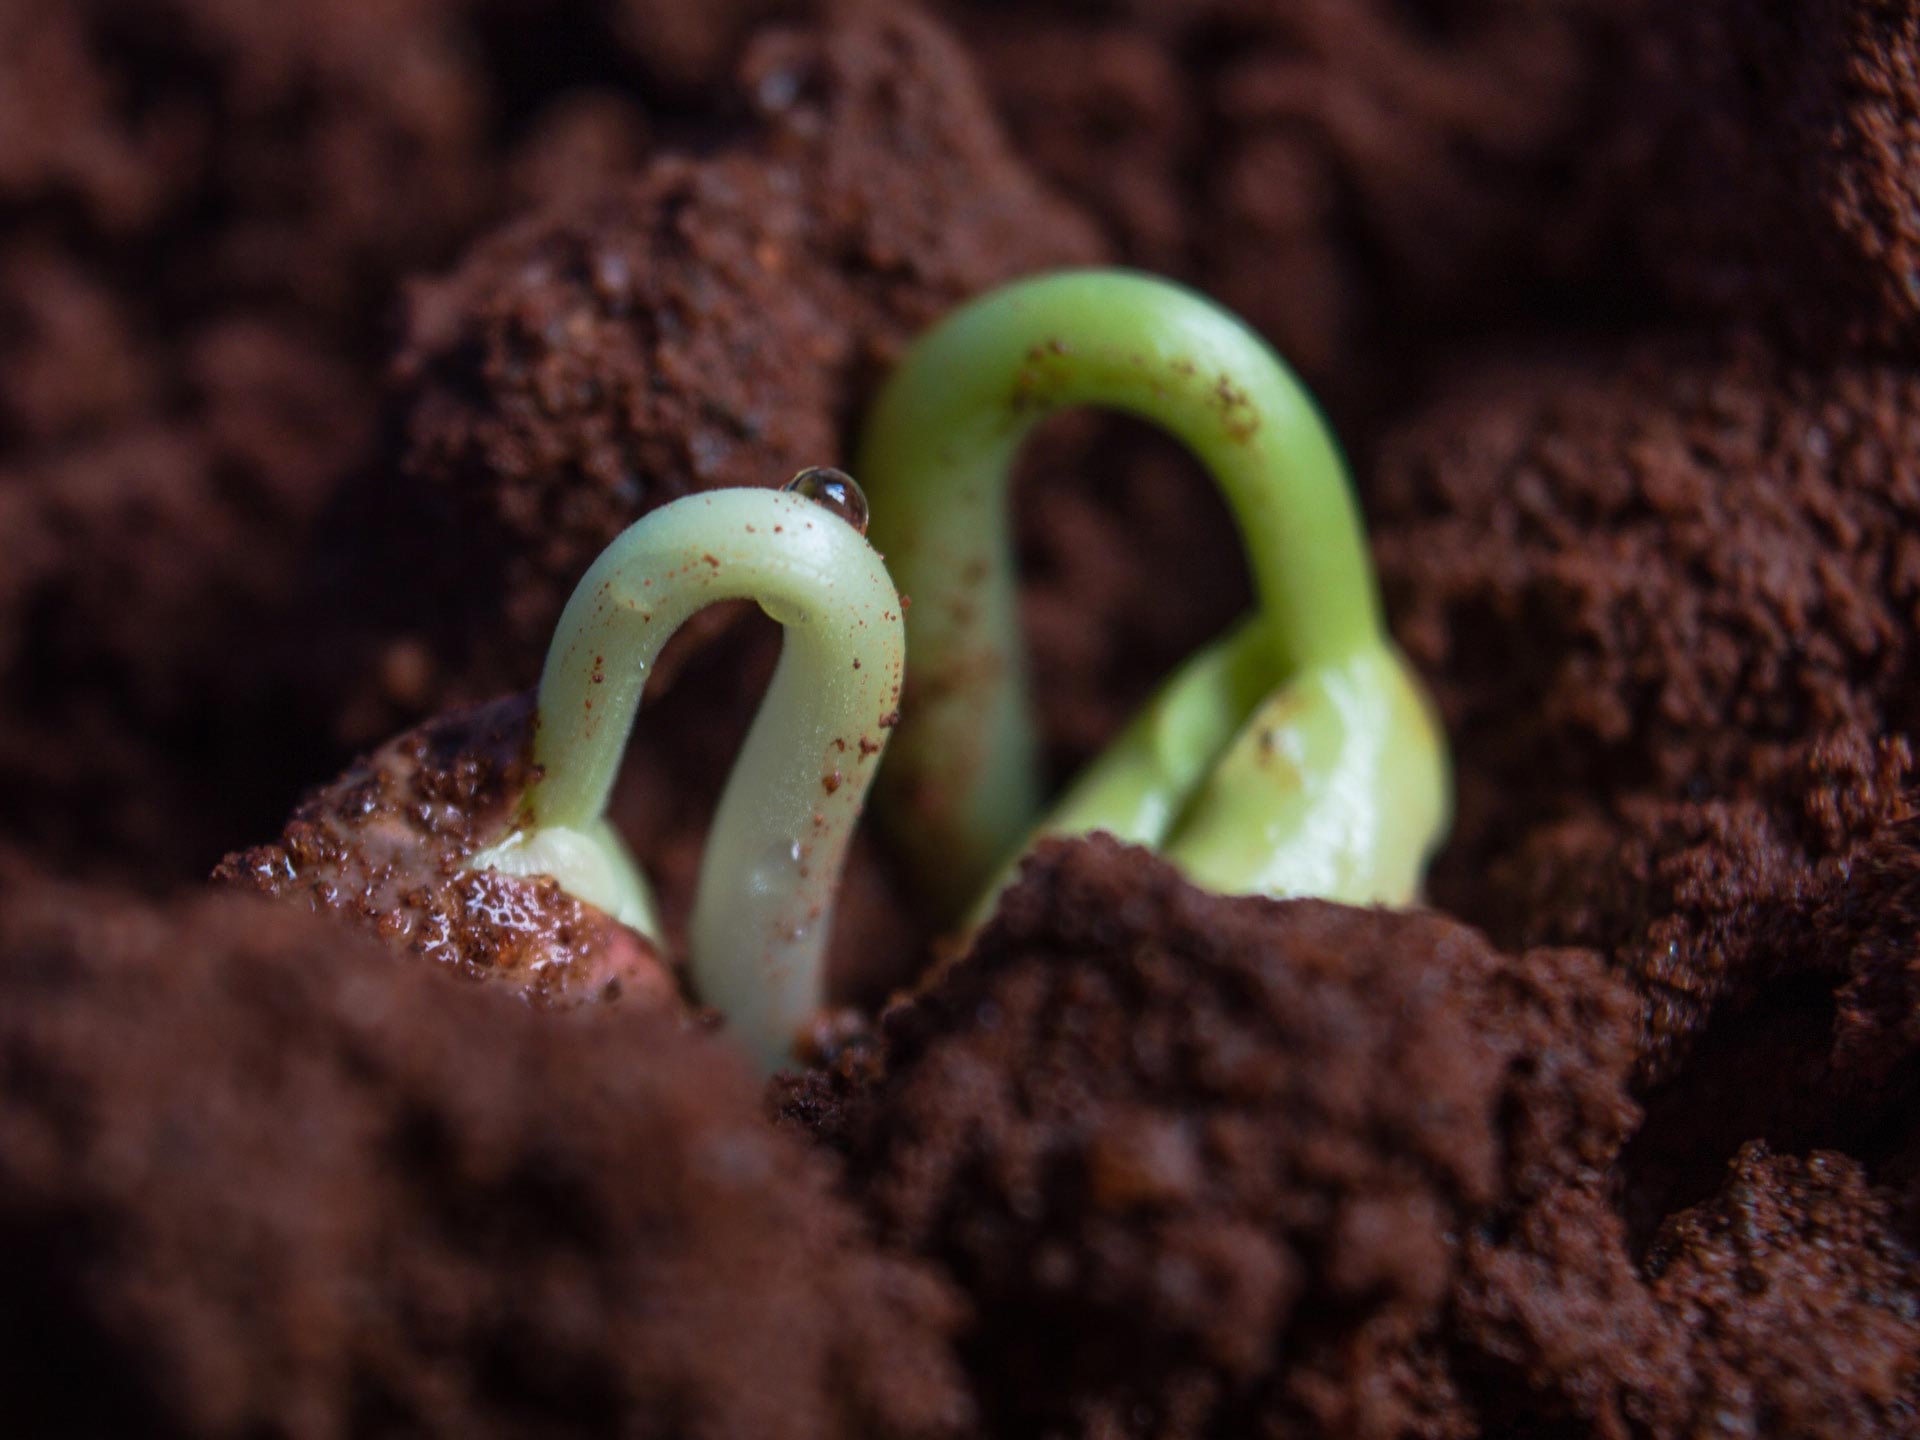 Two plant sprouts